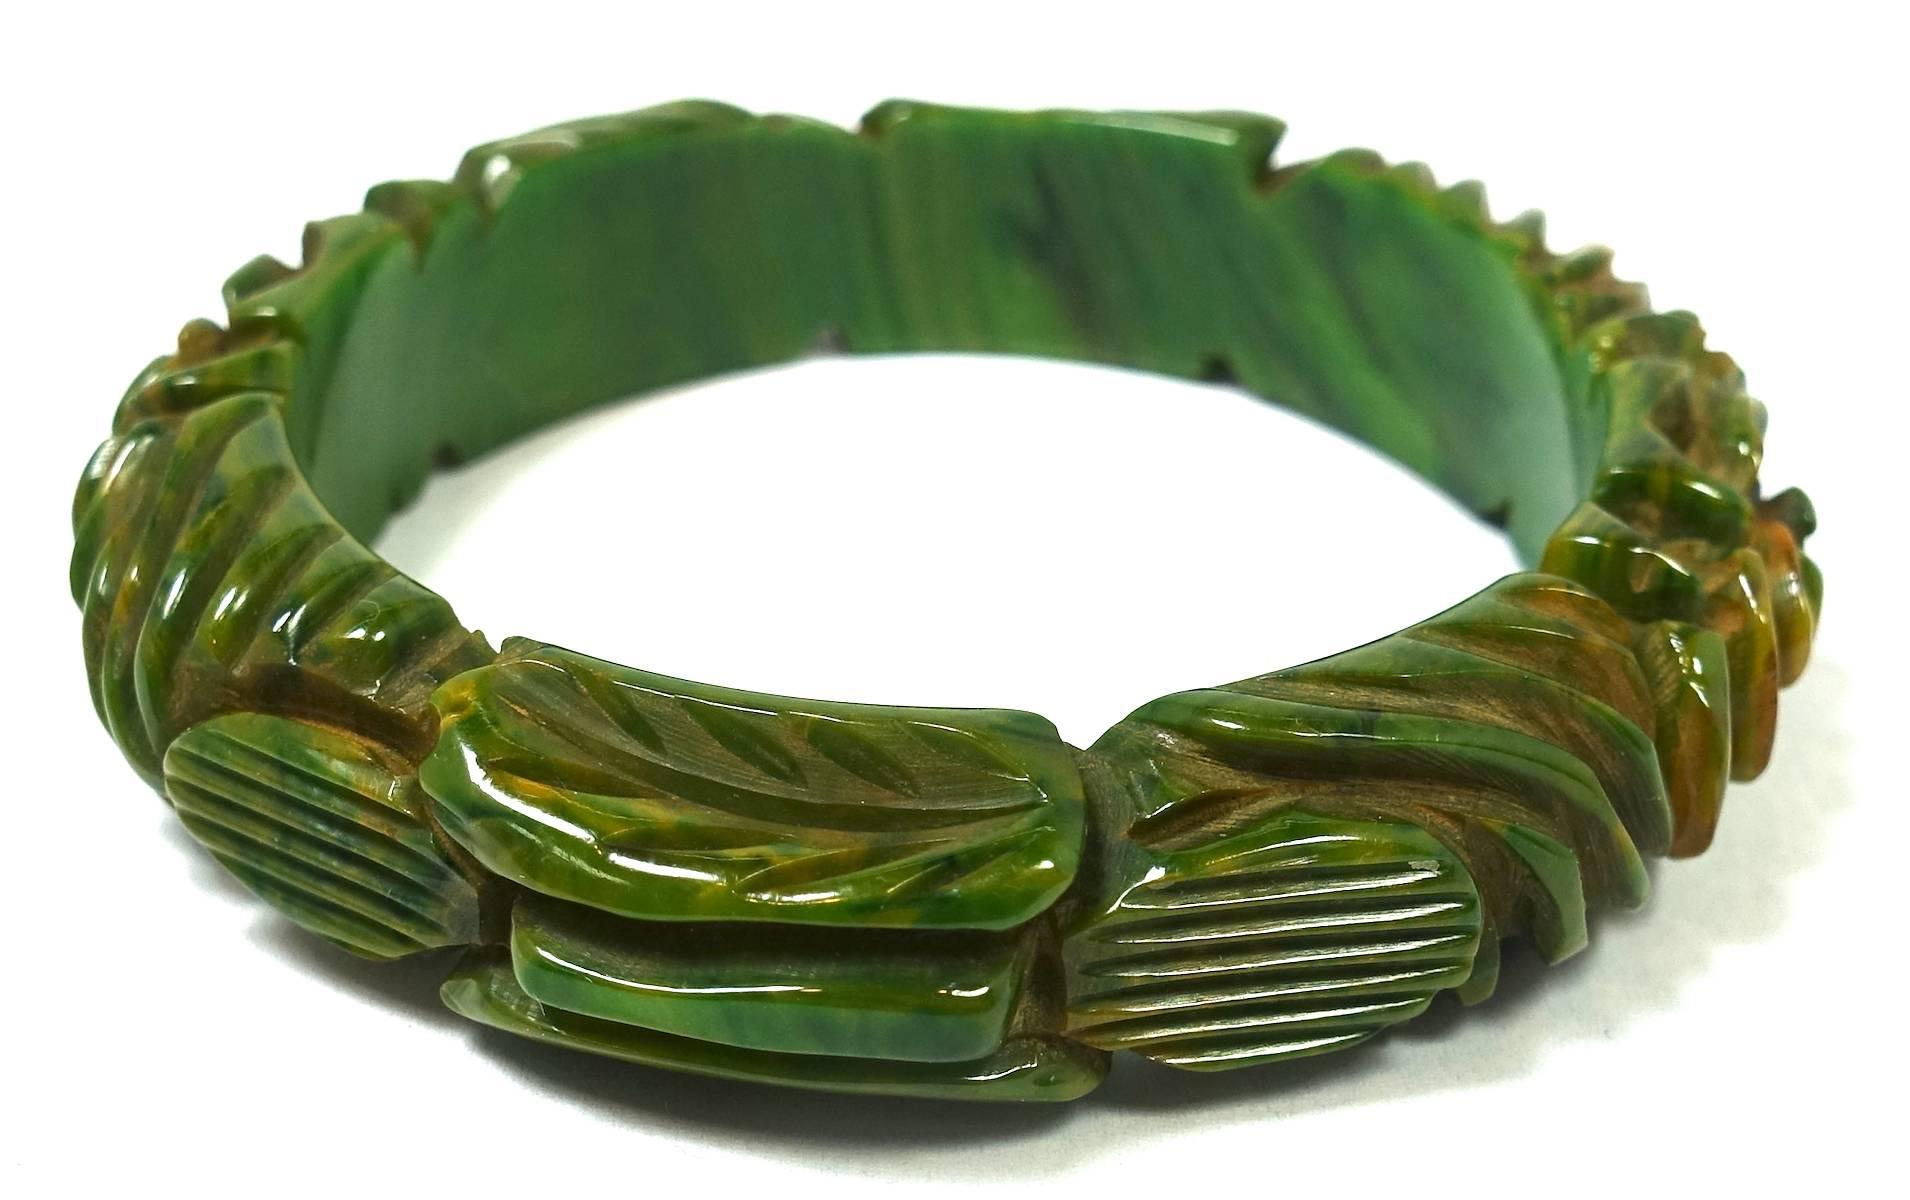 This is a gorgeous, heavily carved Bakelite bangle bracelet in green with hues of rusted coral overall.  This piece measures 7-3/4” x 5/8” and is in excellent condition.